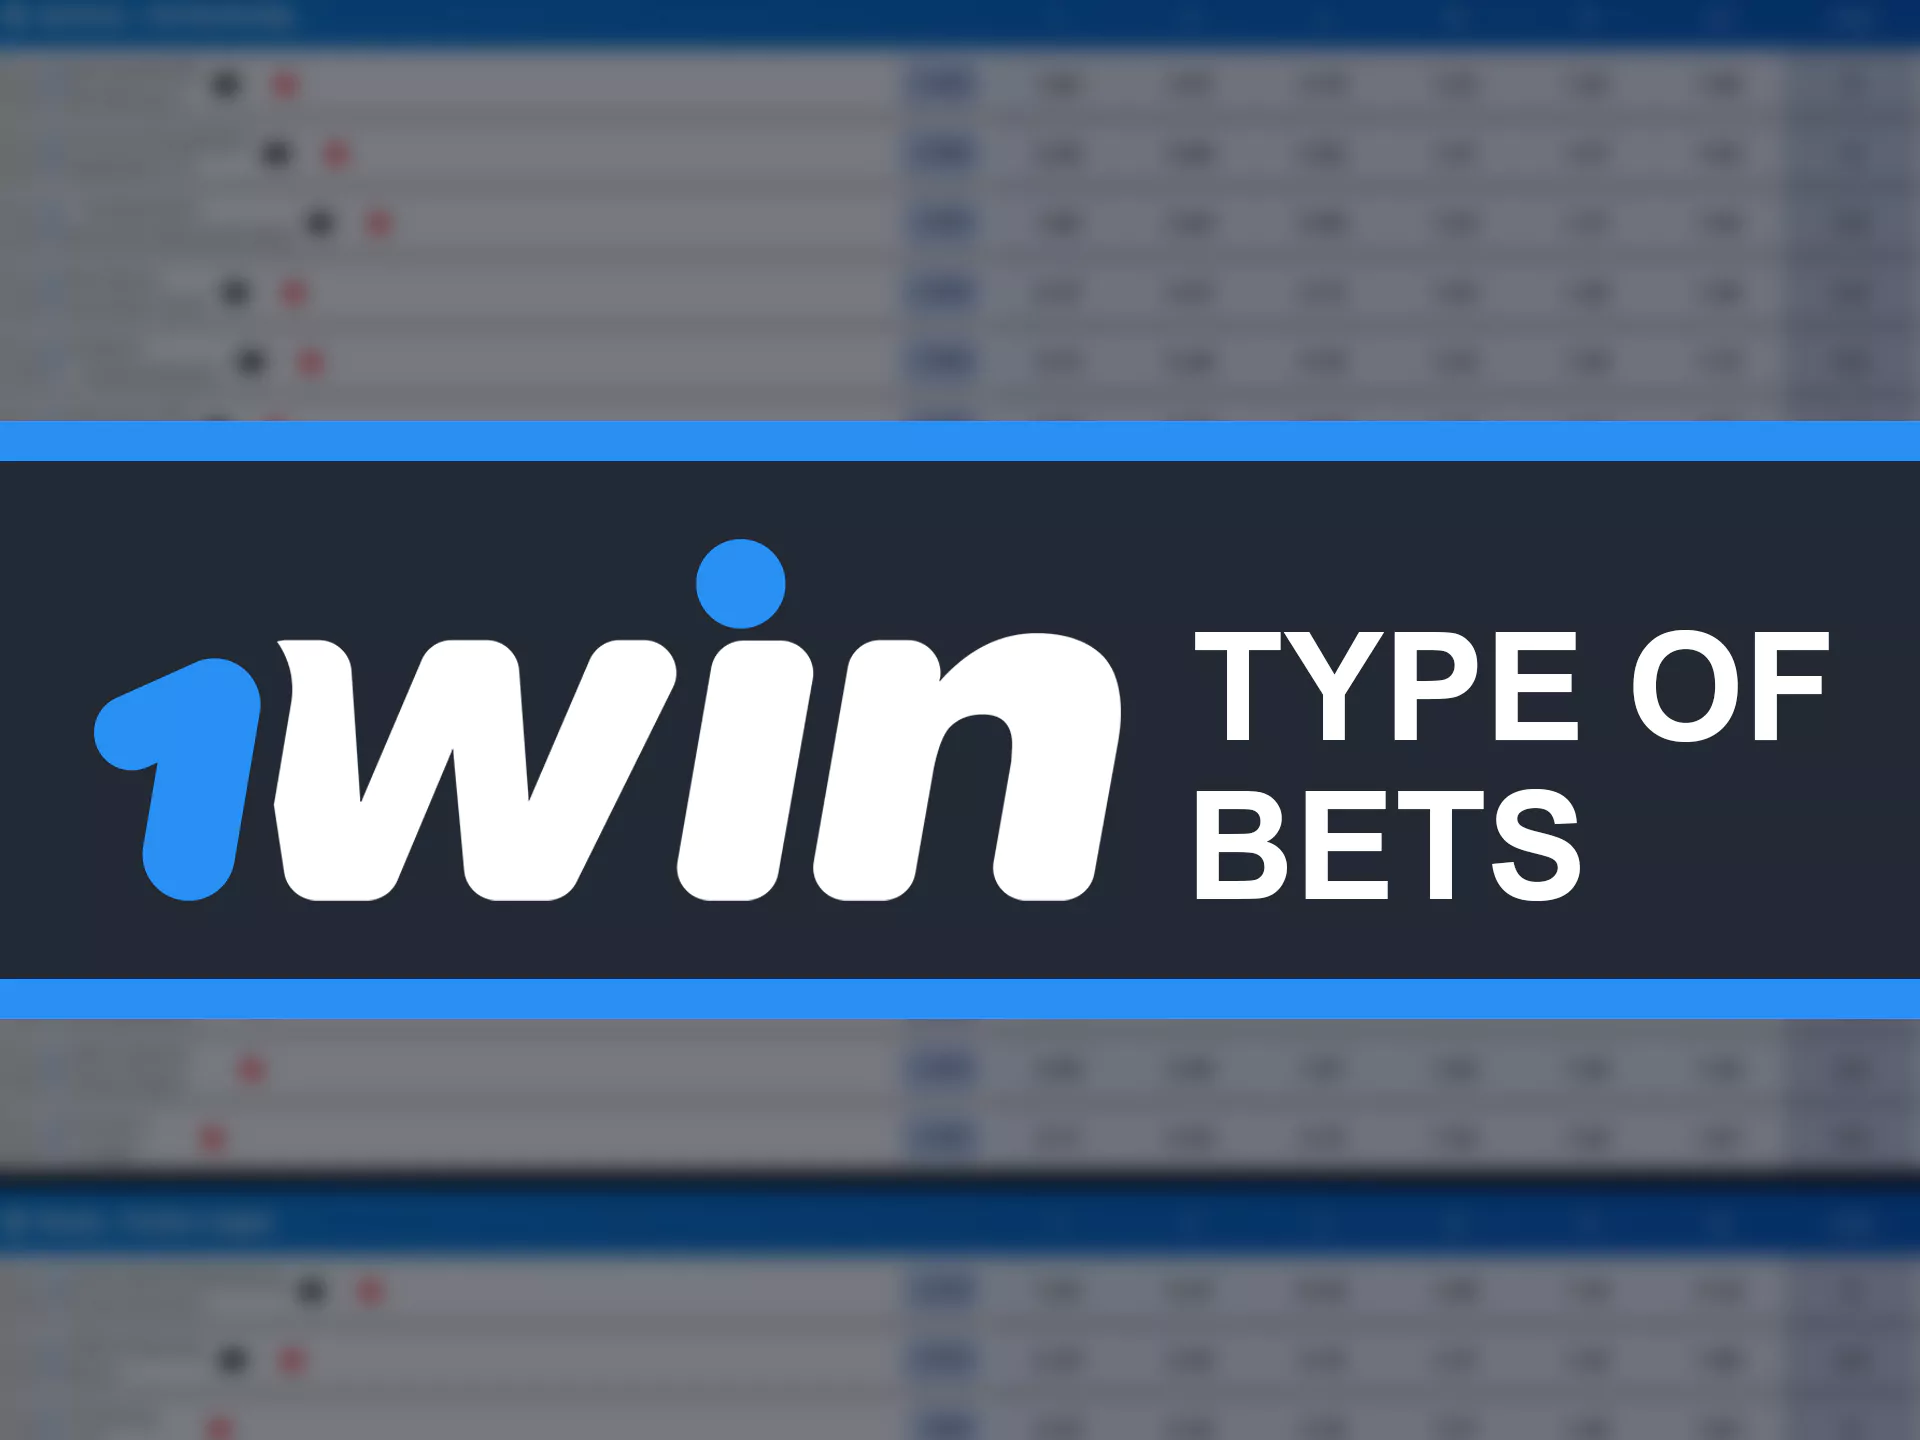 Learn about all of the type of bets at 1win.